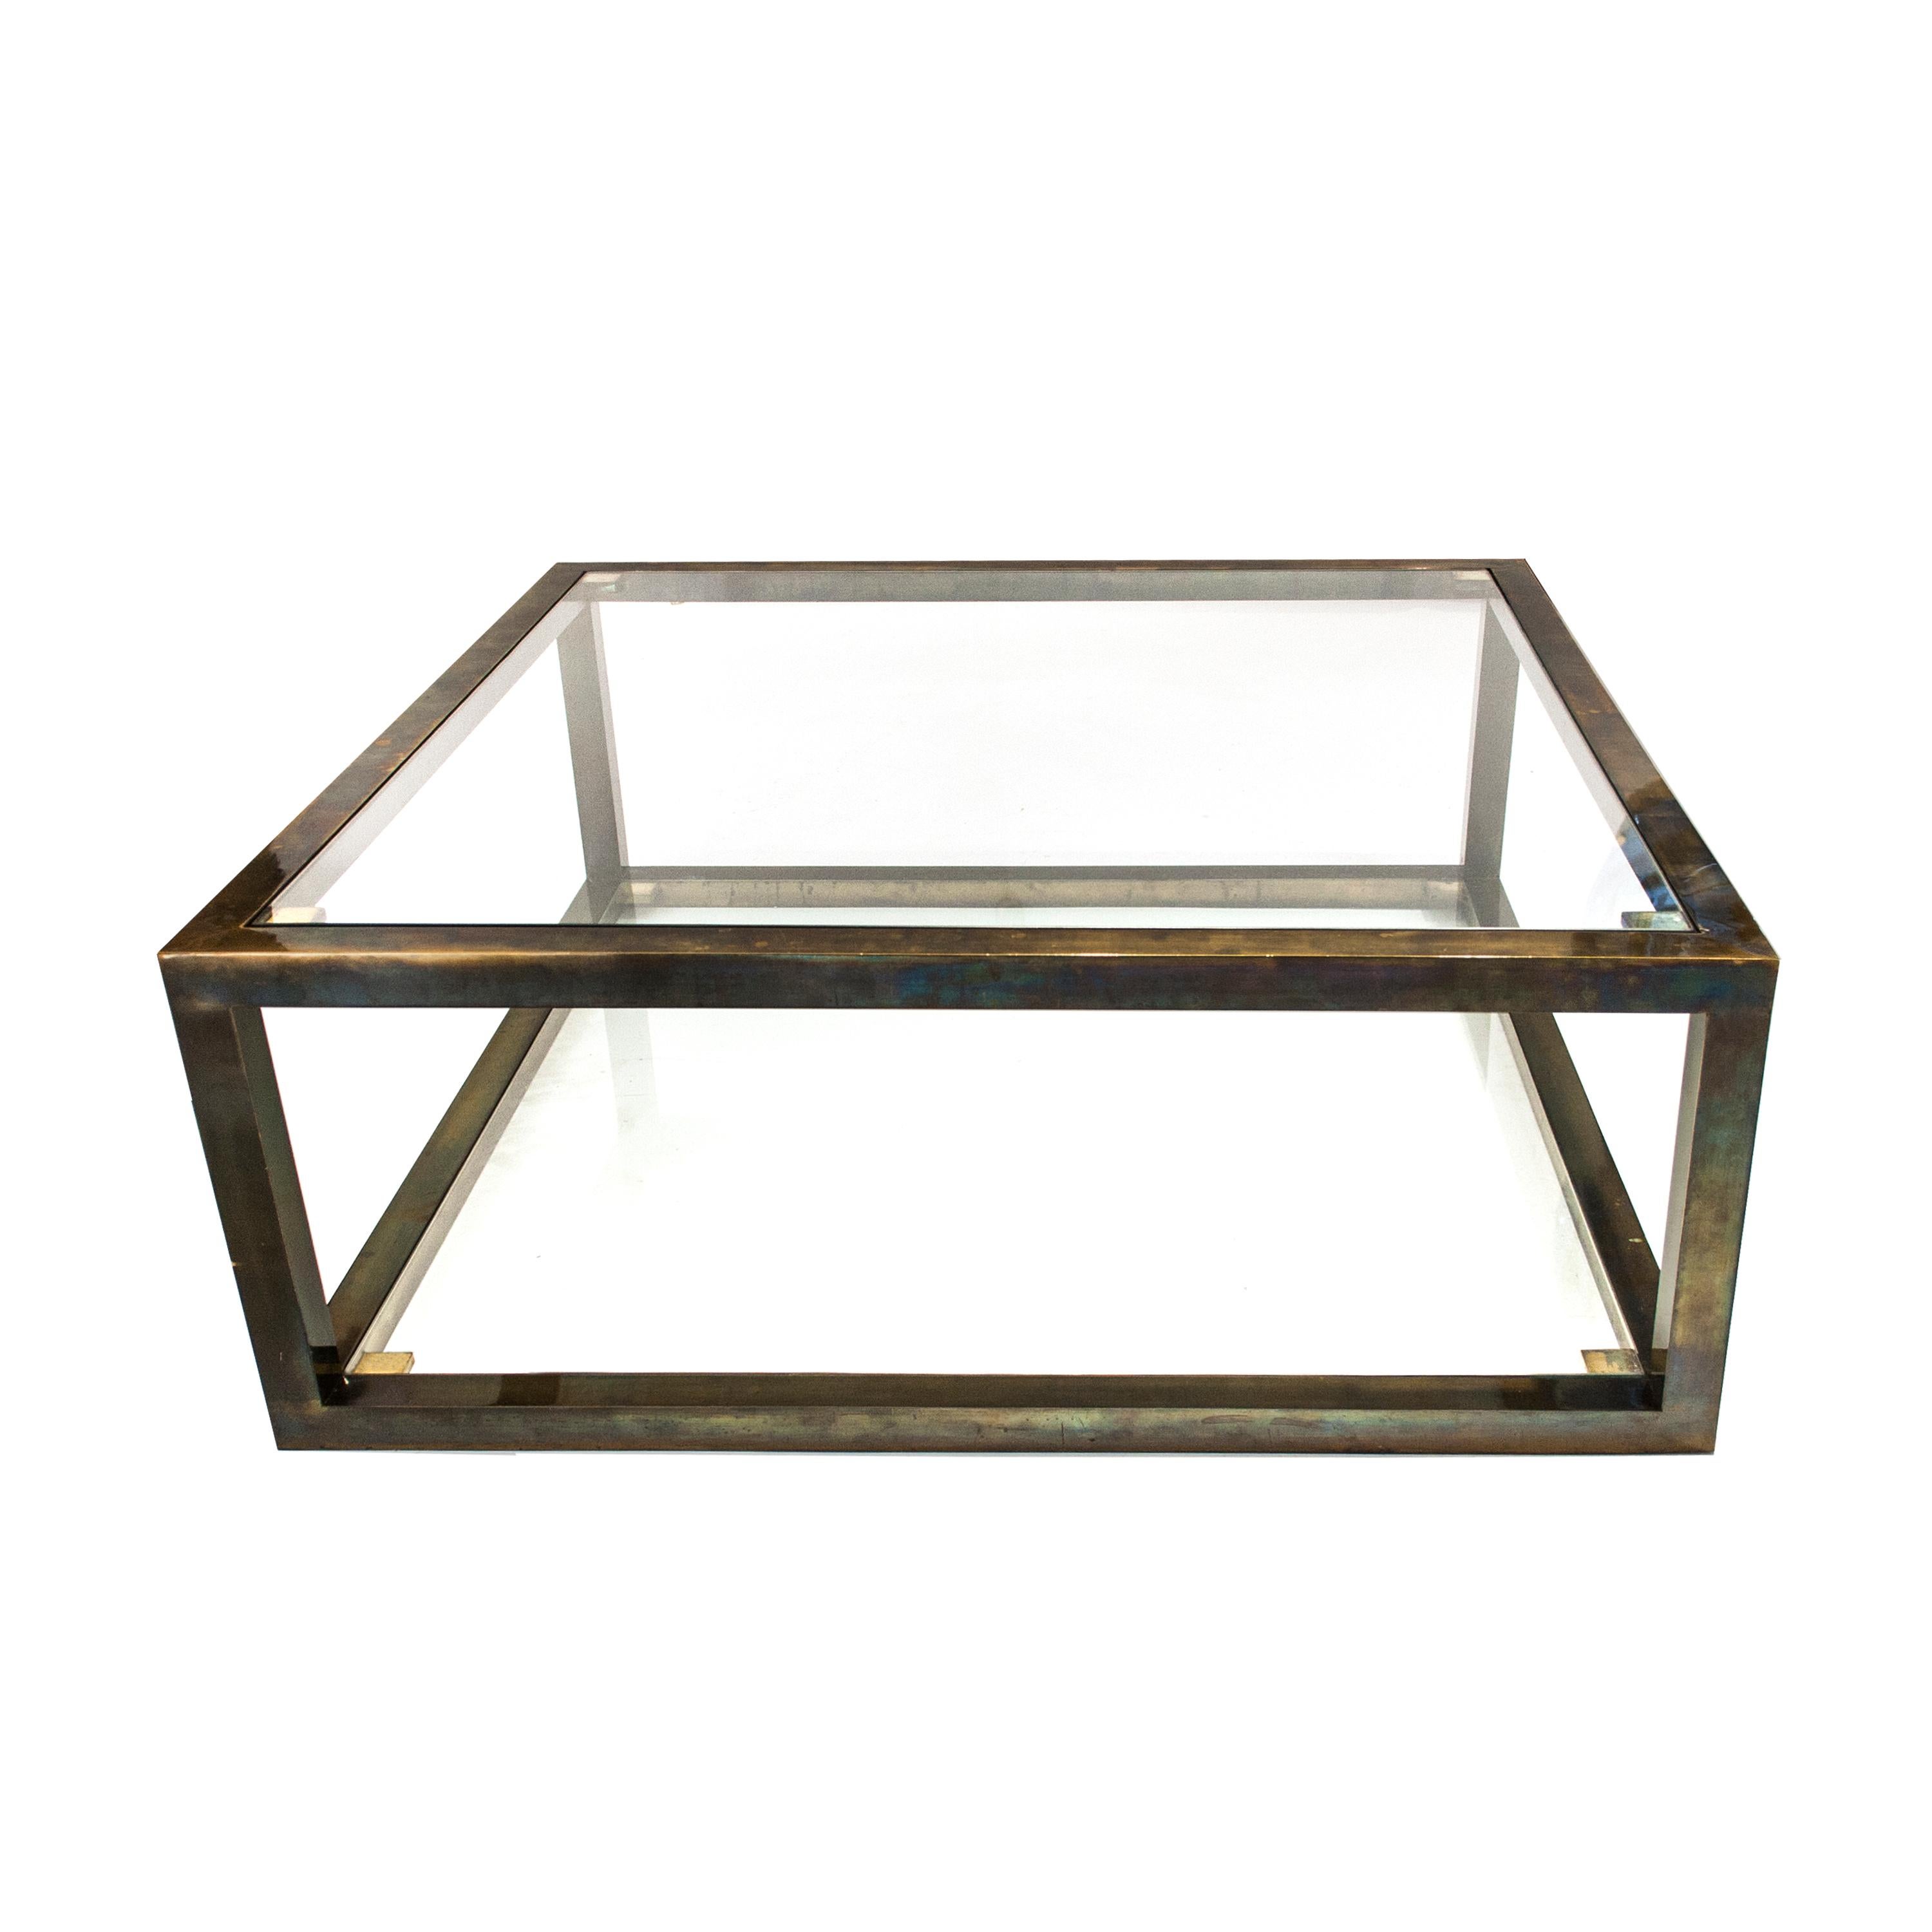 French Mid-Century Modern Brass Square 100 x 100 cm Center Table, France, 1960 For Sale